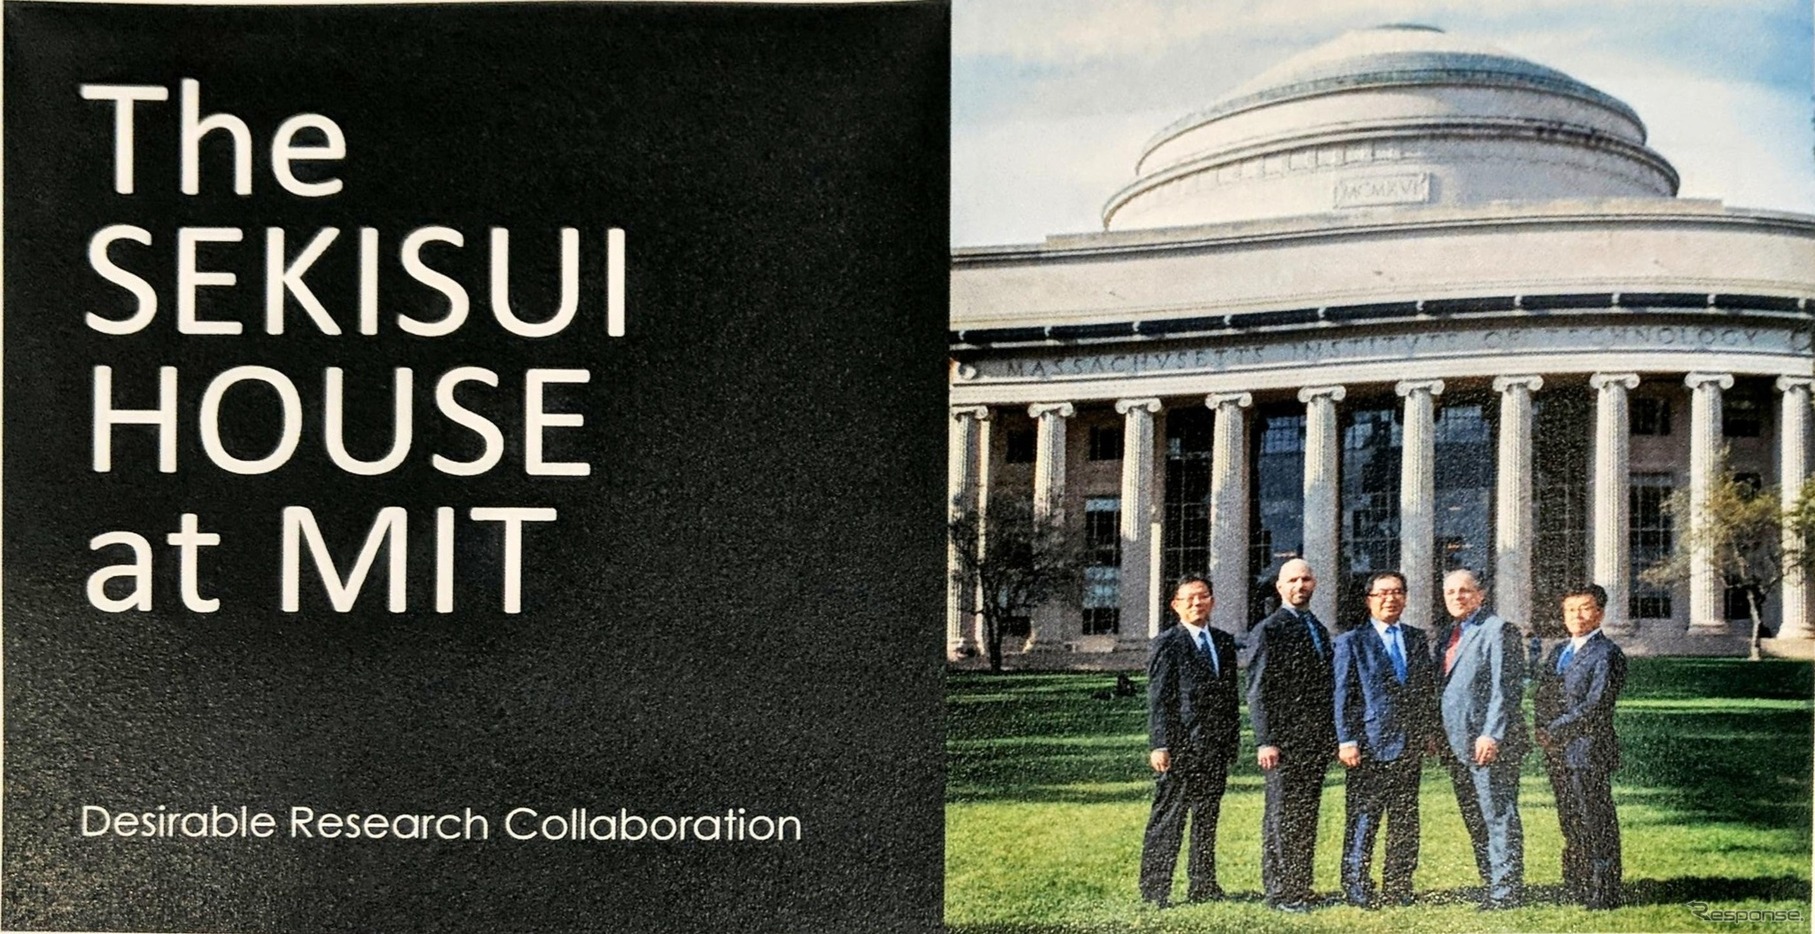 The Sekisui House at MIT